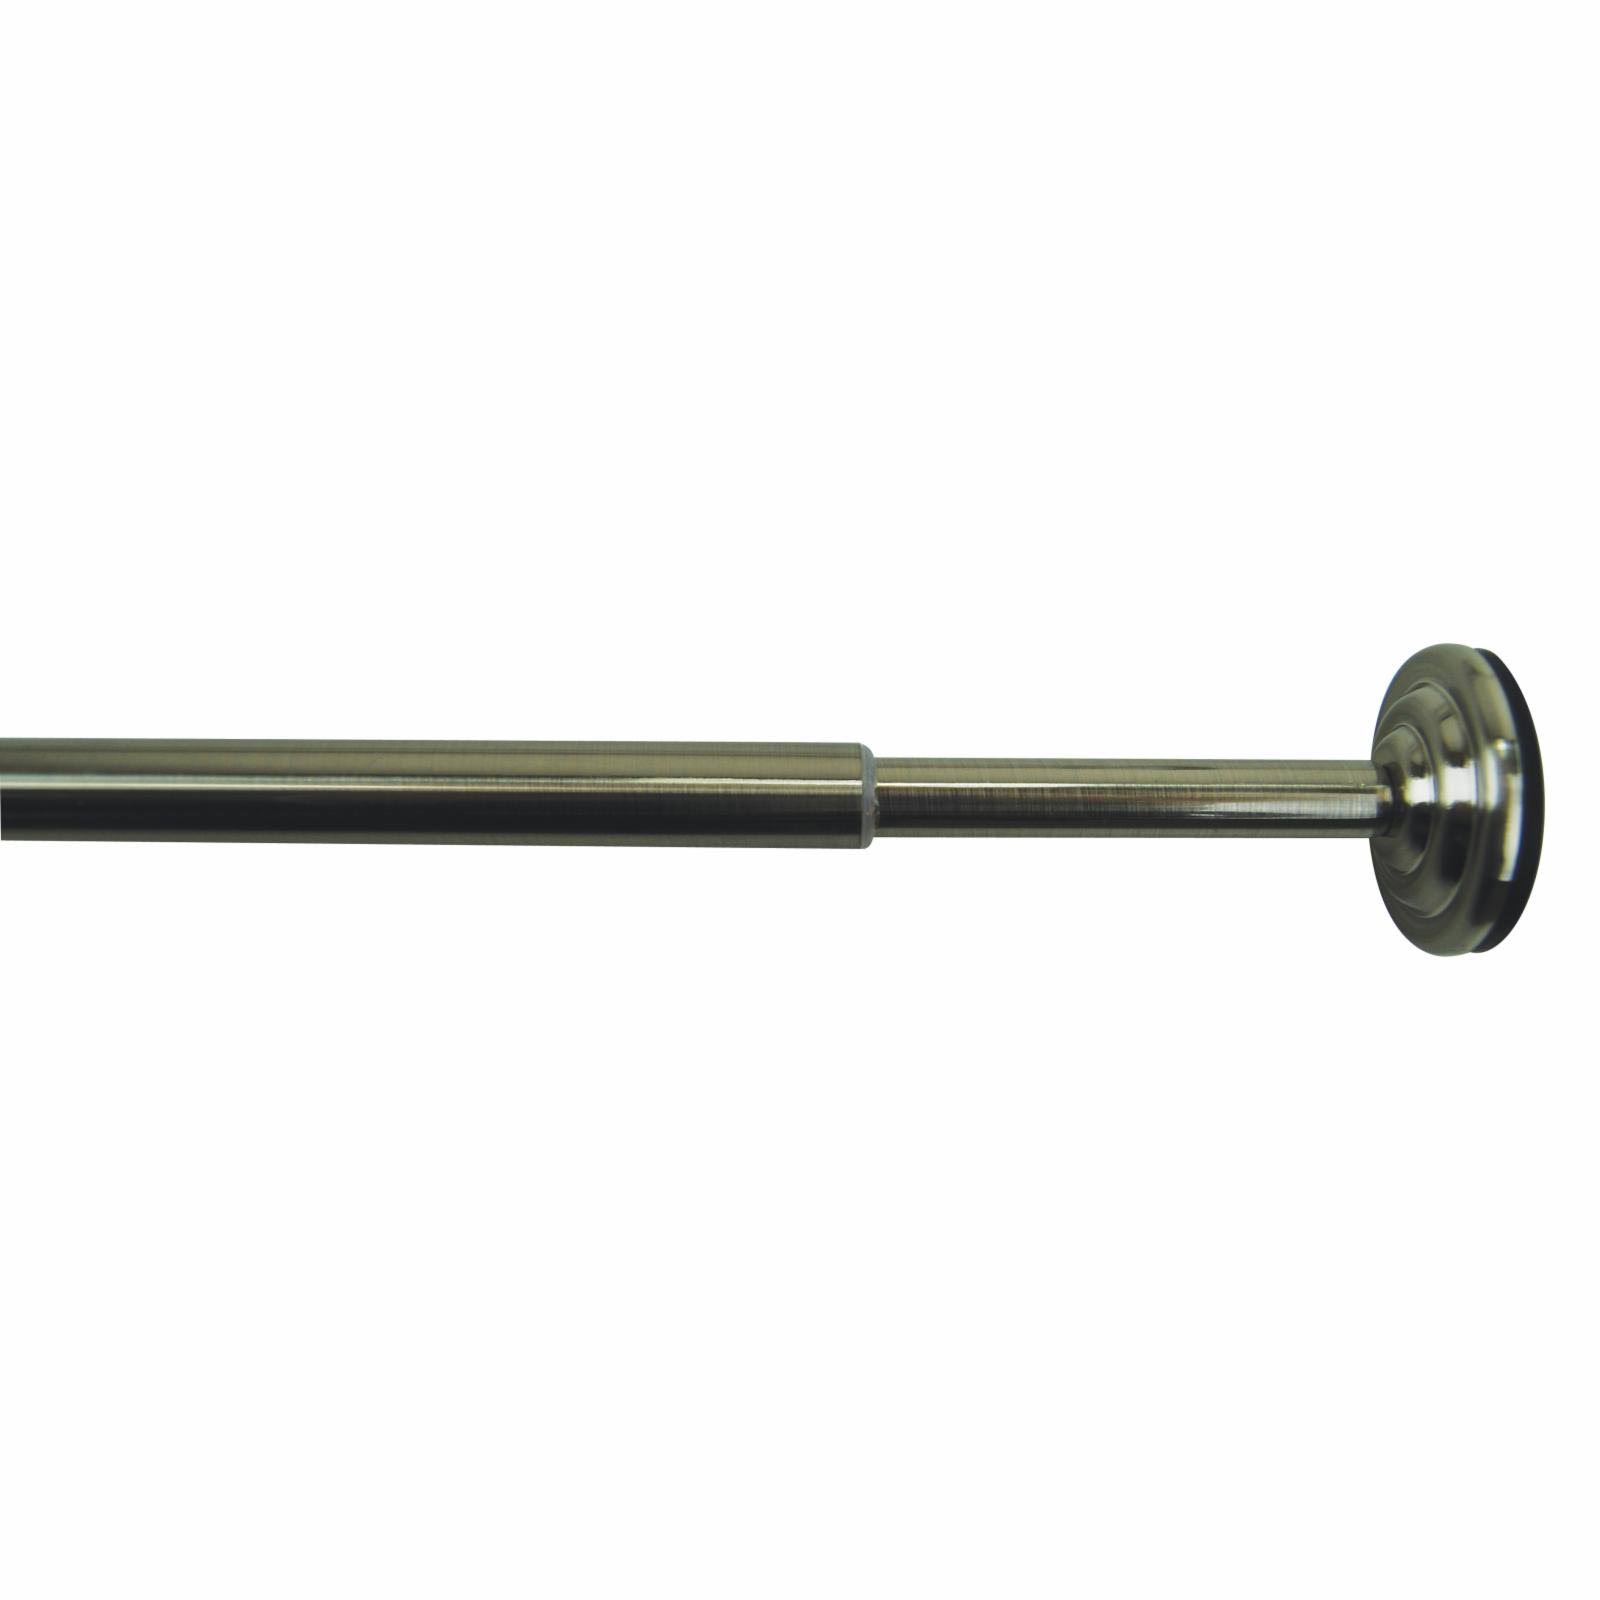 Versailles Home Fashions MTR3654-903 0.5 In. Tension Rod 36-54 In. - Brushed Nickel